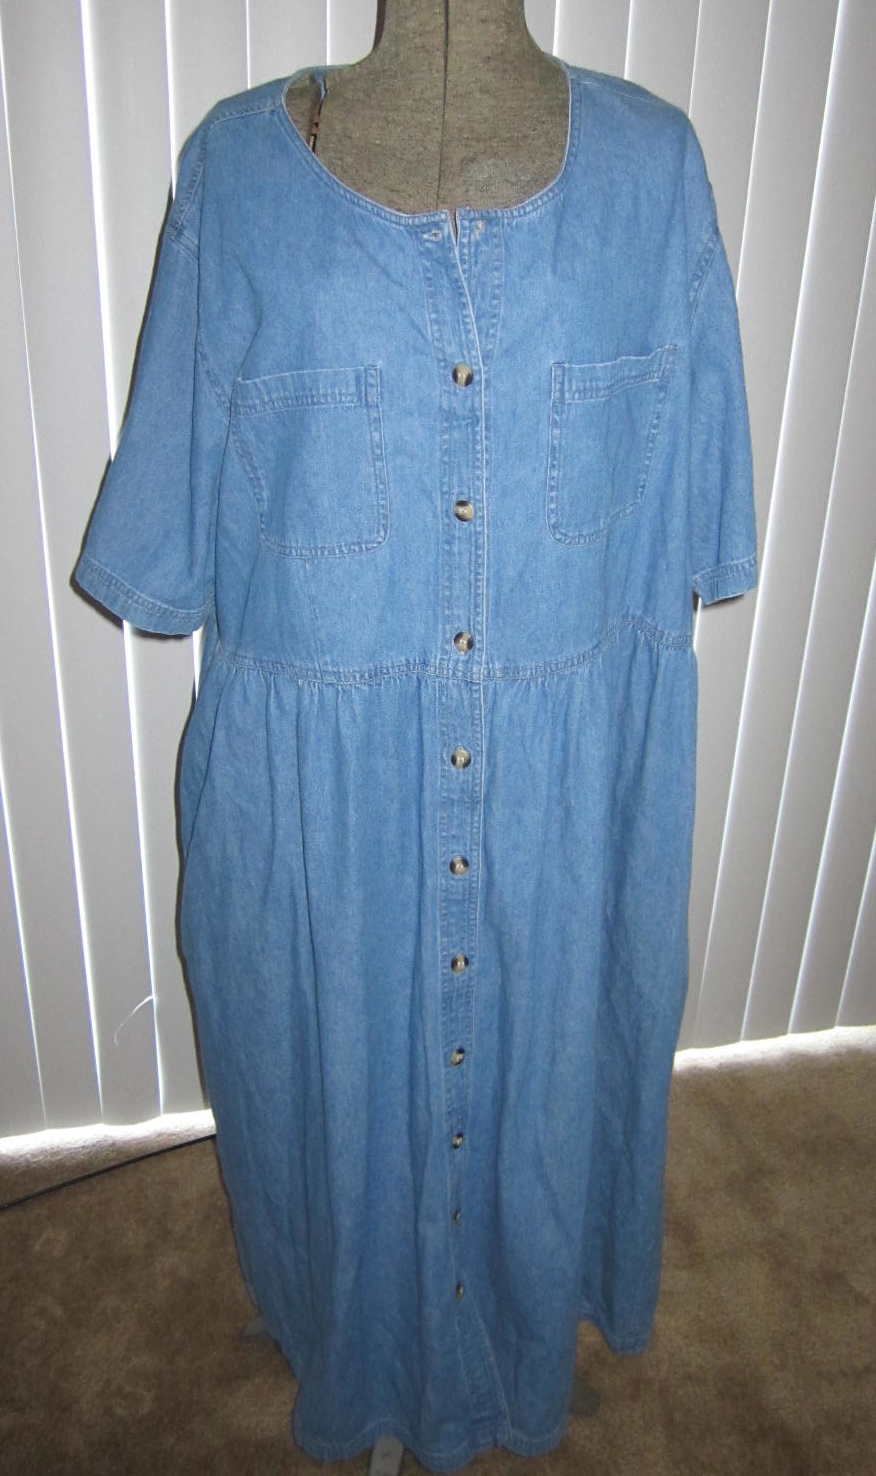 My Pink Hanger: The Very Bad, Awful, Horrible, Terrible Denim Dress ...